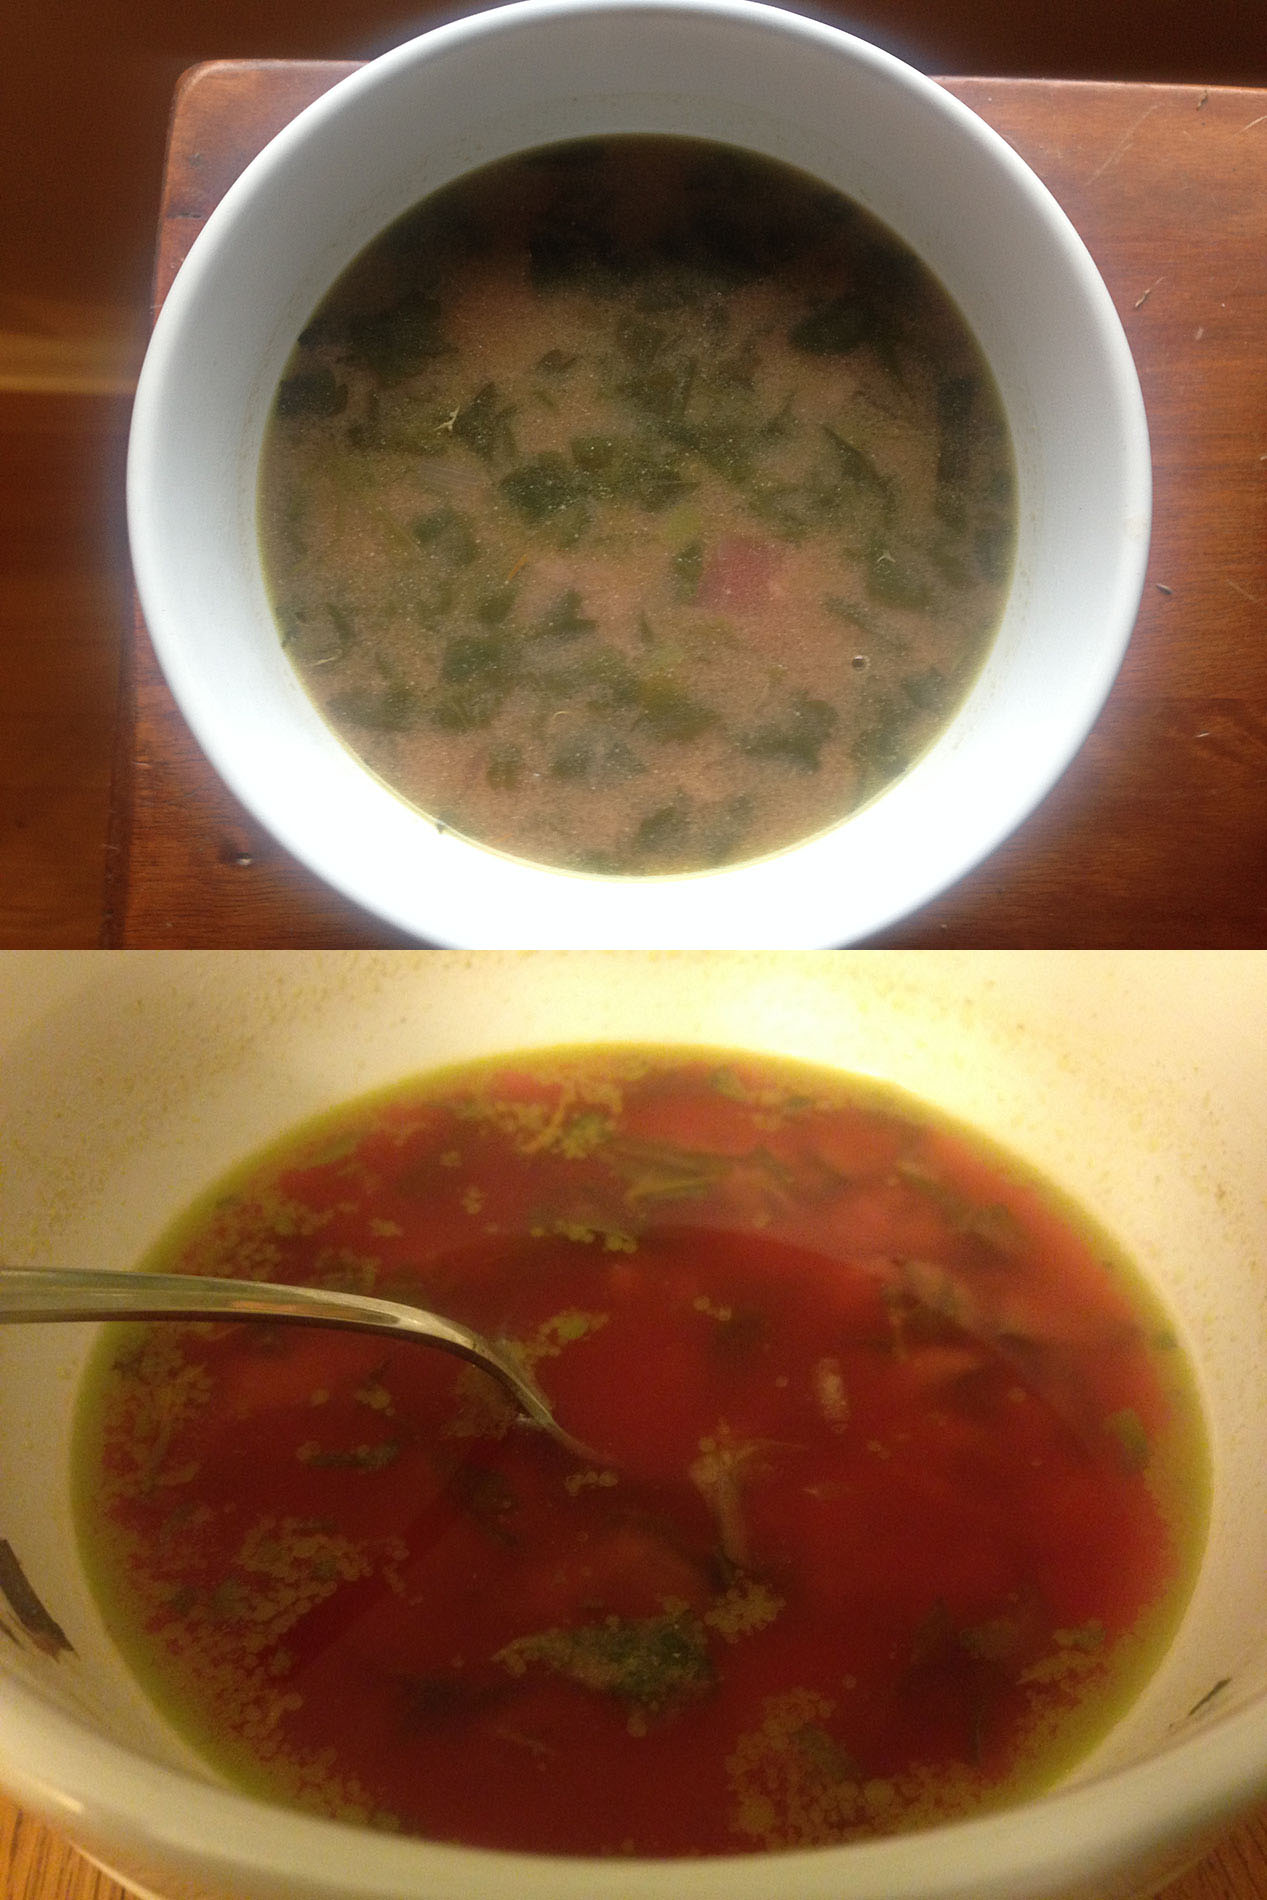 Top:The soup took on an unappealing colour Bottom: The soup began to separate after a few minutes and became even more off-putting